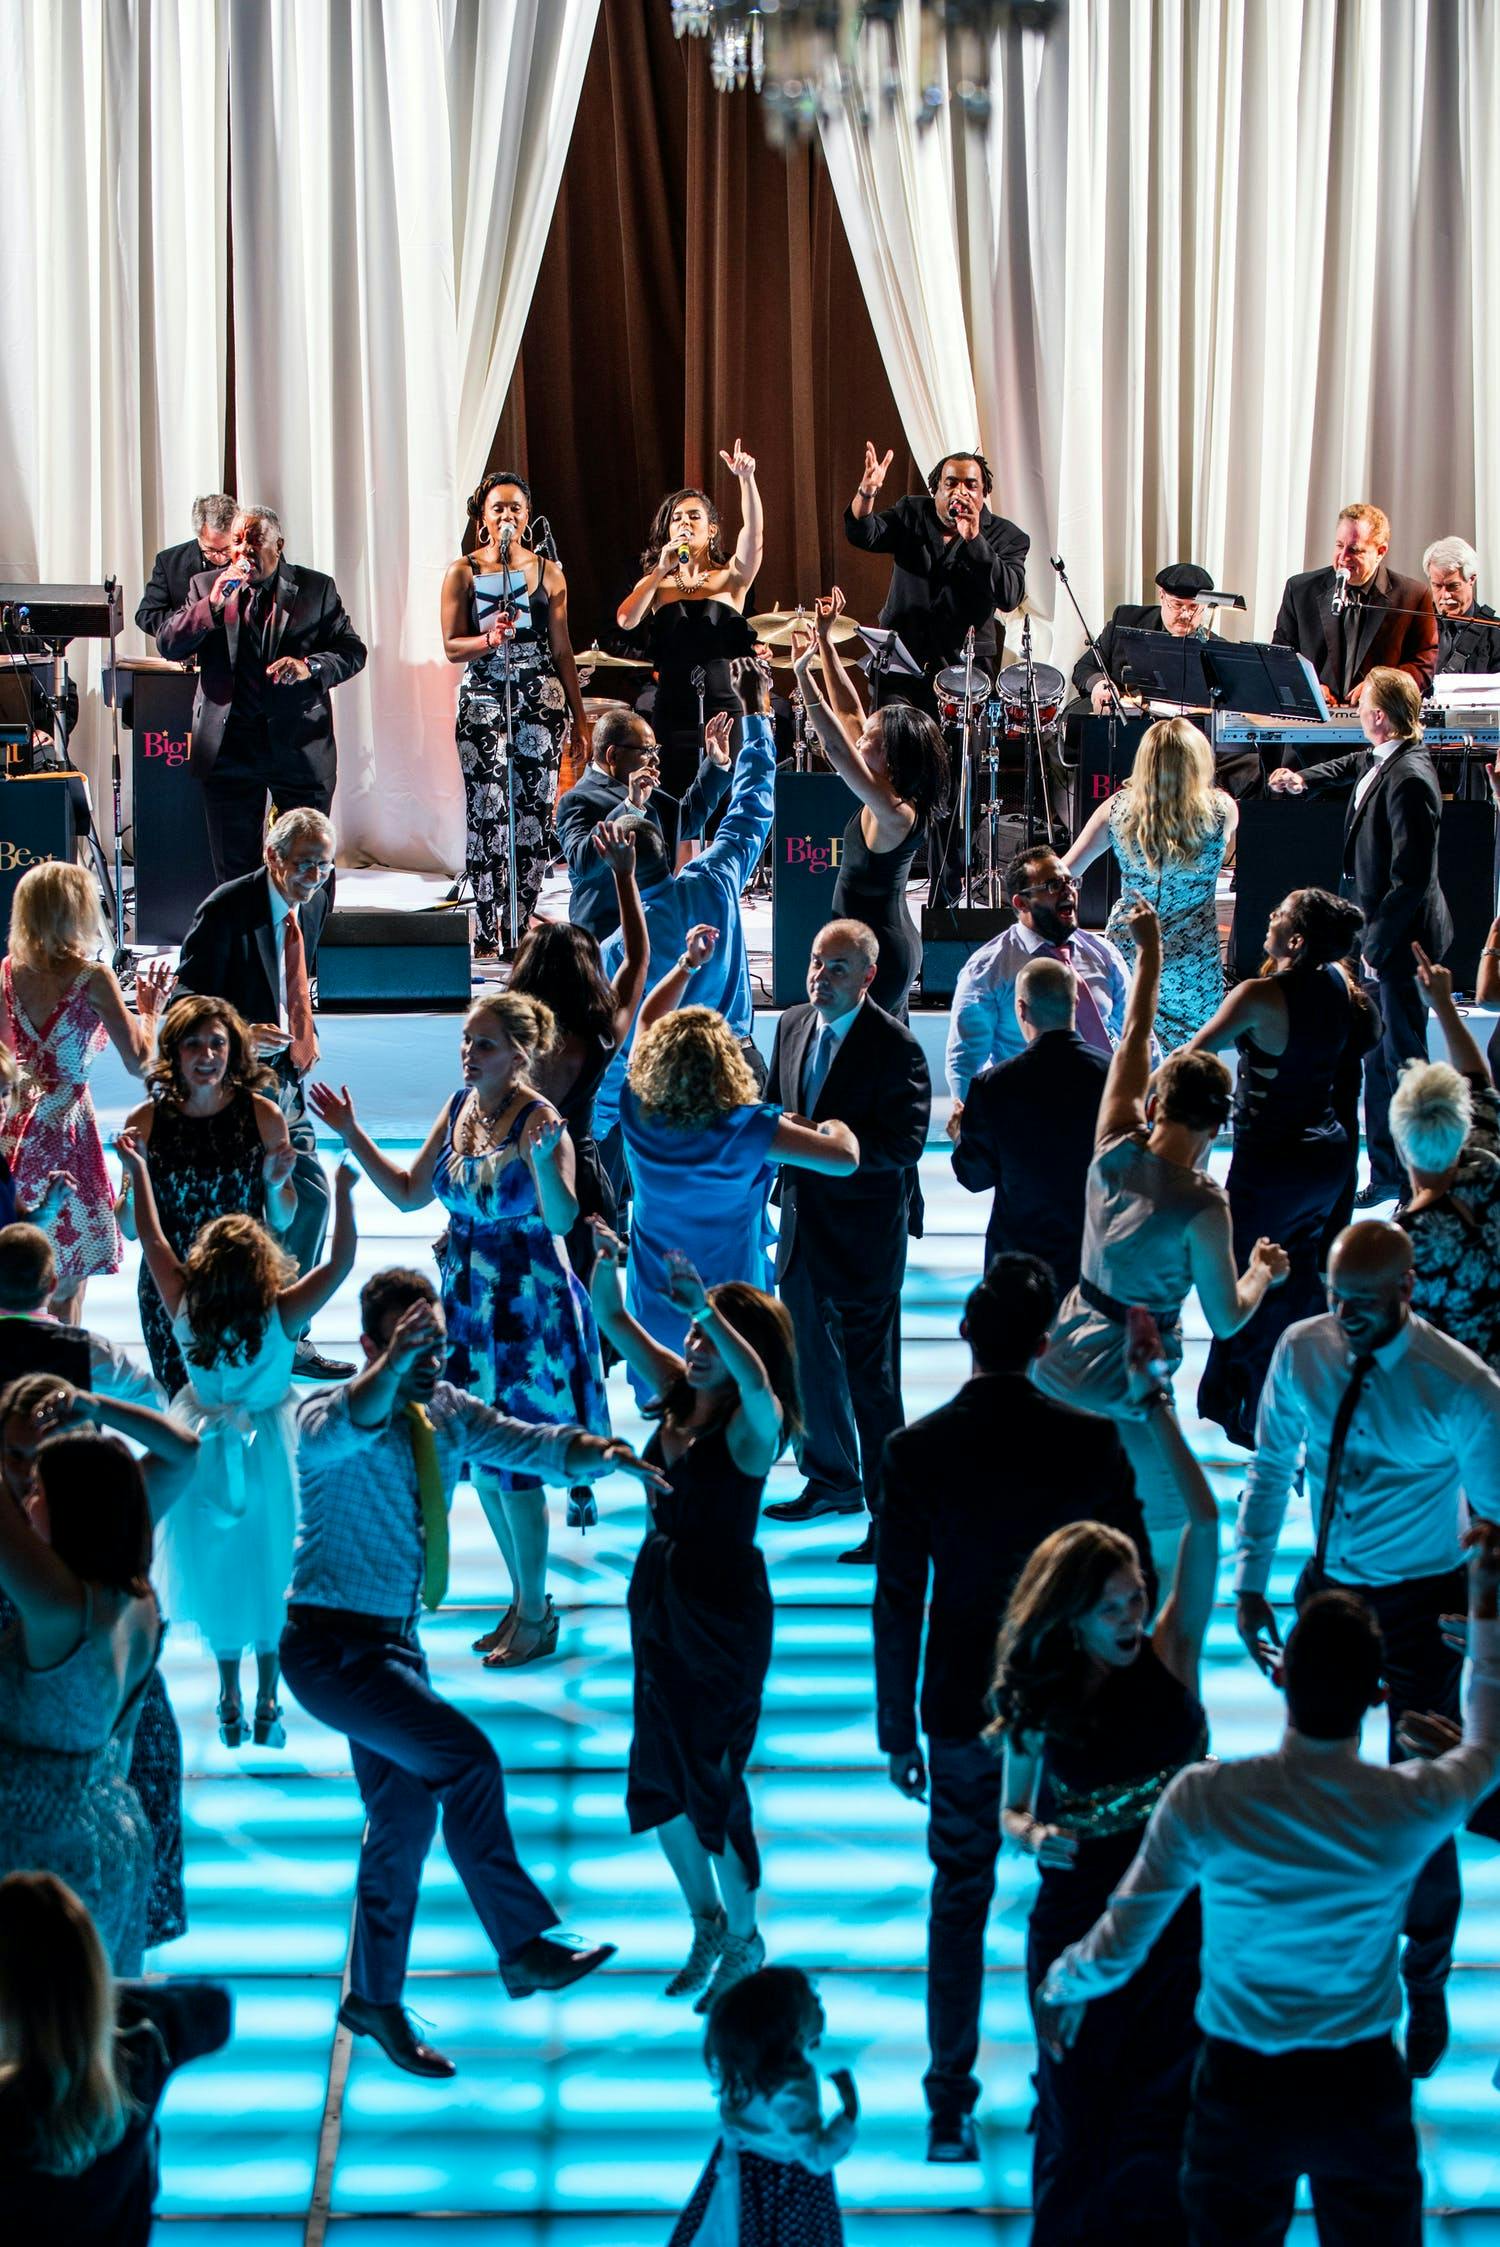 Guests dance on LED blue dance floor at wedding with performance by band Cagen Music LLC of Chicago, IL | PartySlate